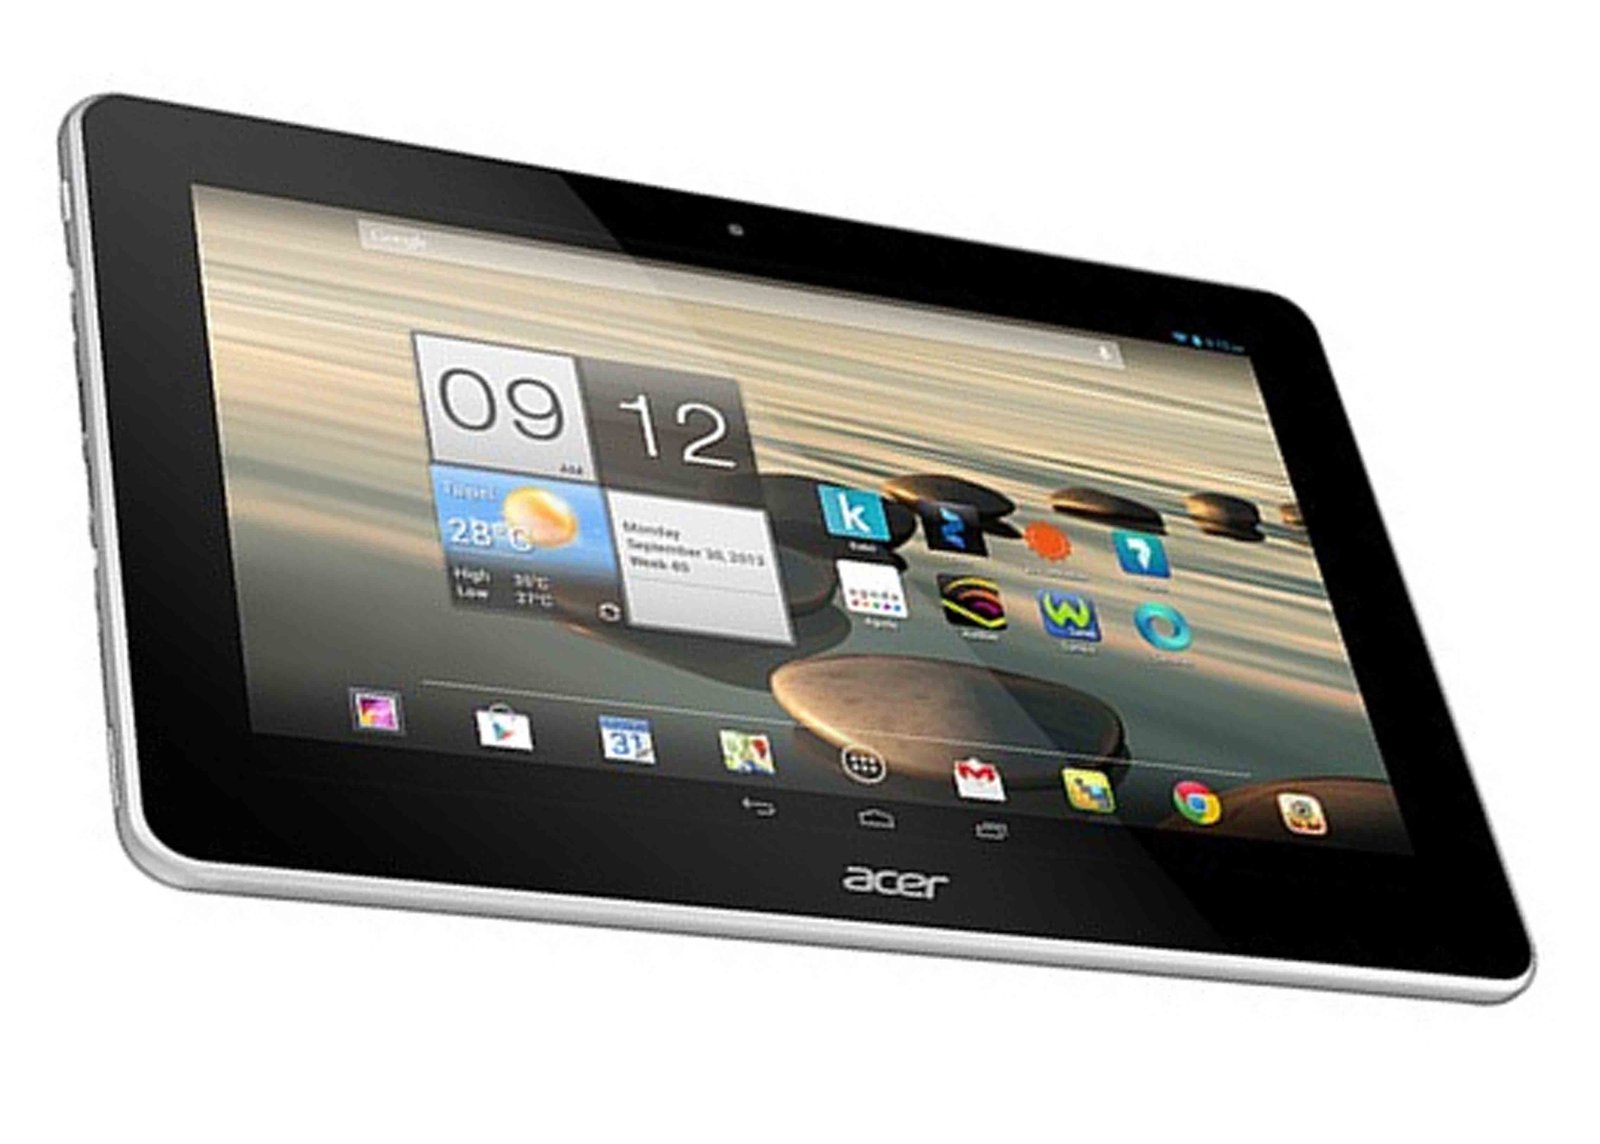 Acer launches new 10.1-inch Android tablet